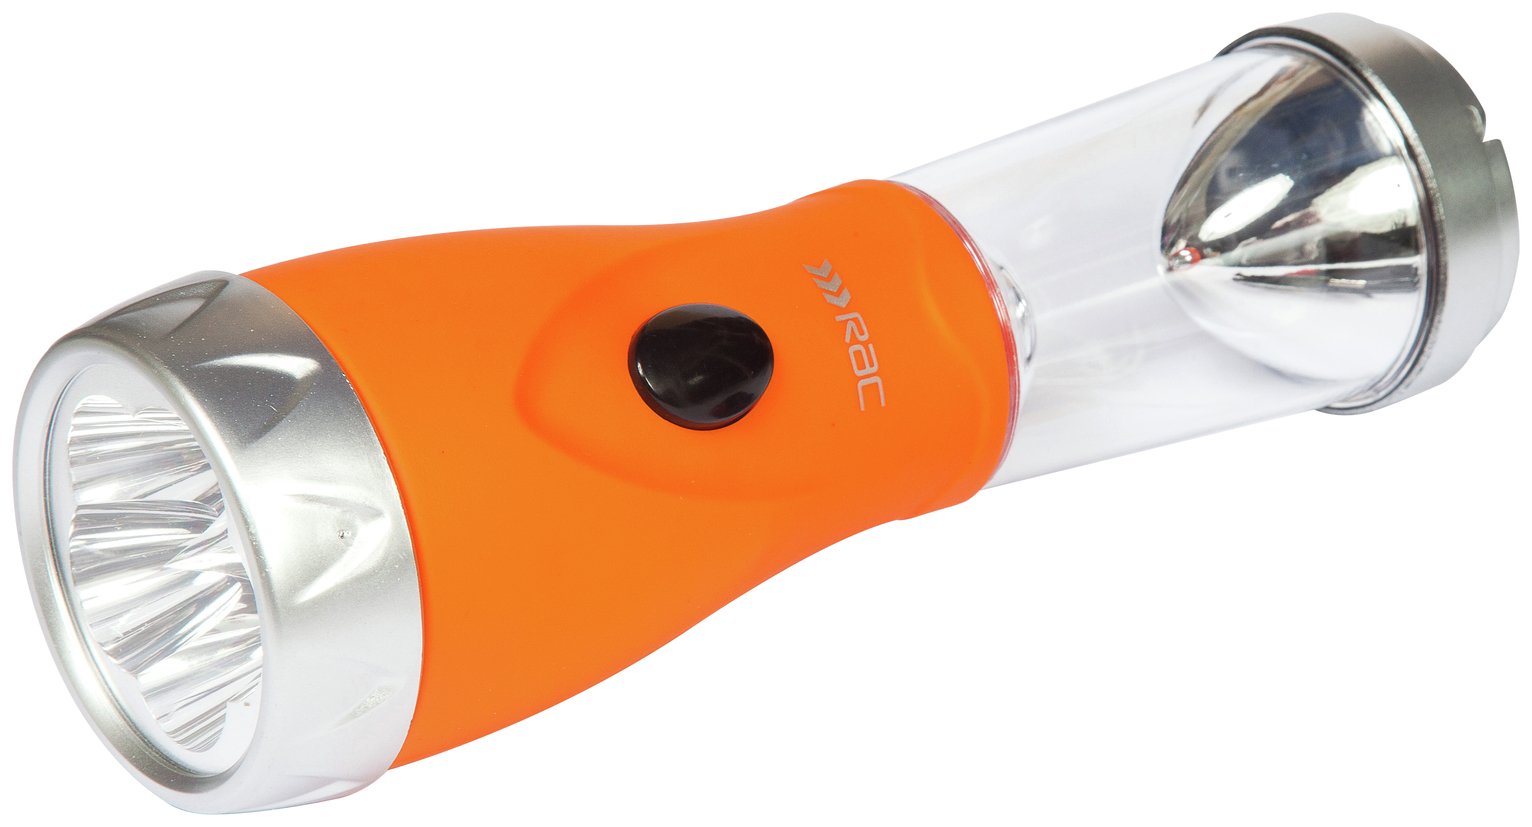 RAC RACHP67 2-in-1 LED Torch and Lantern